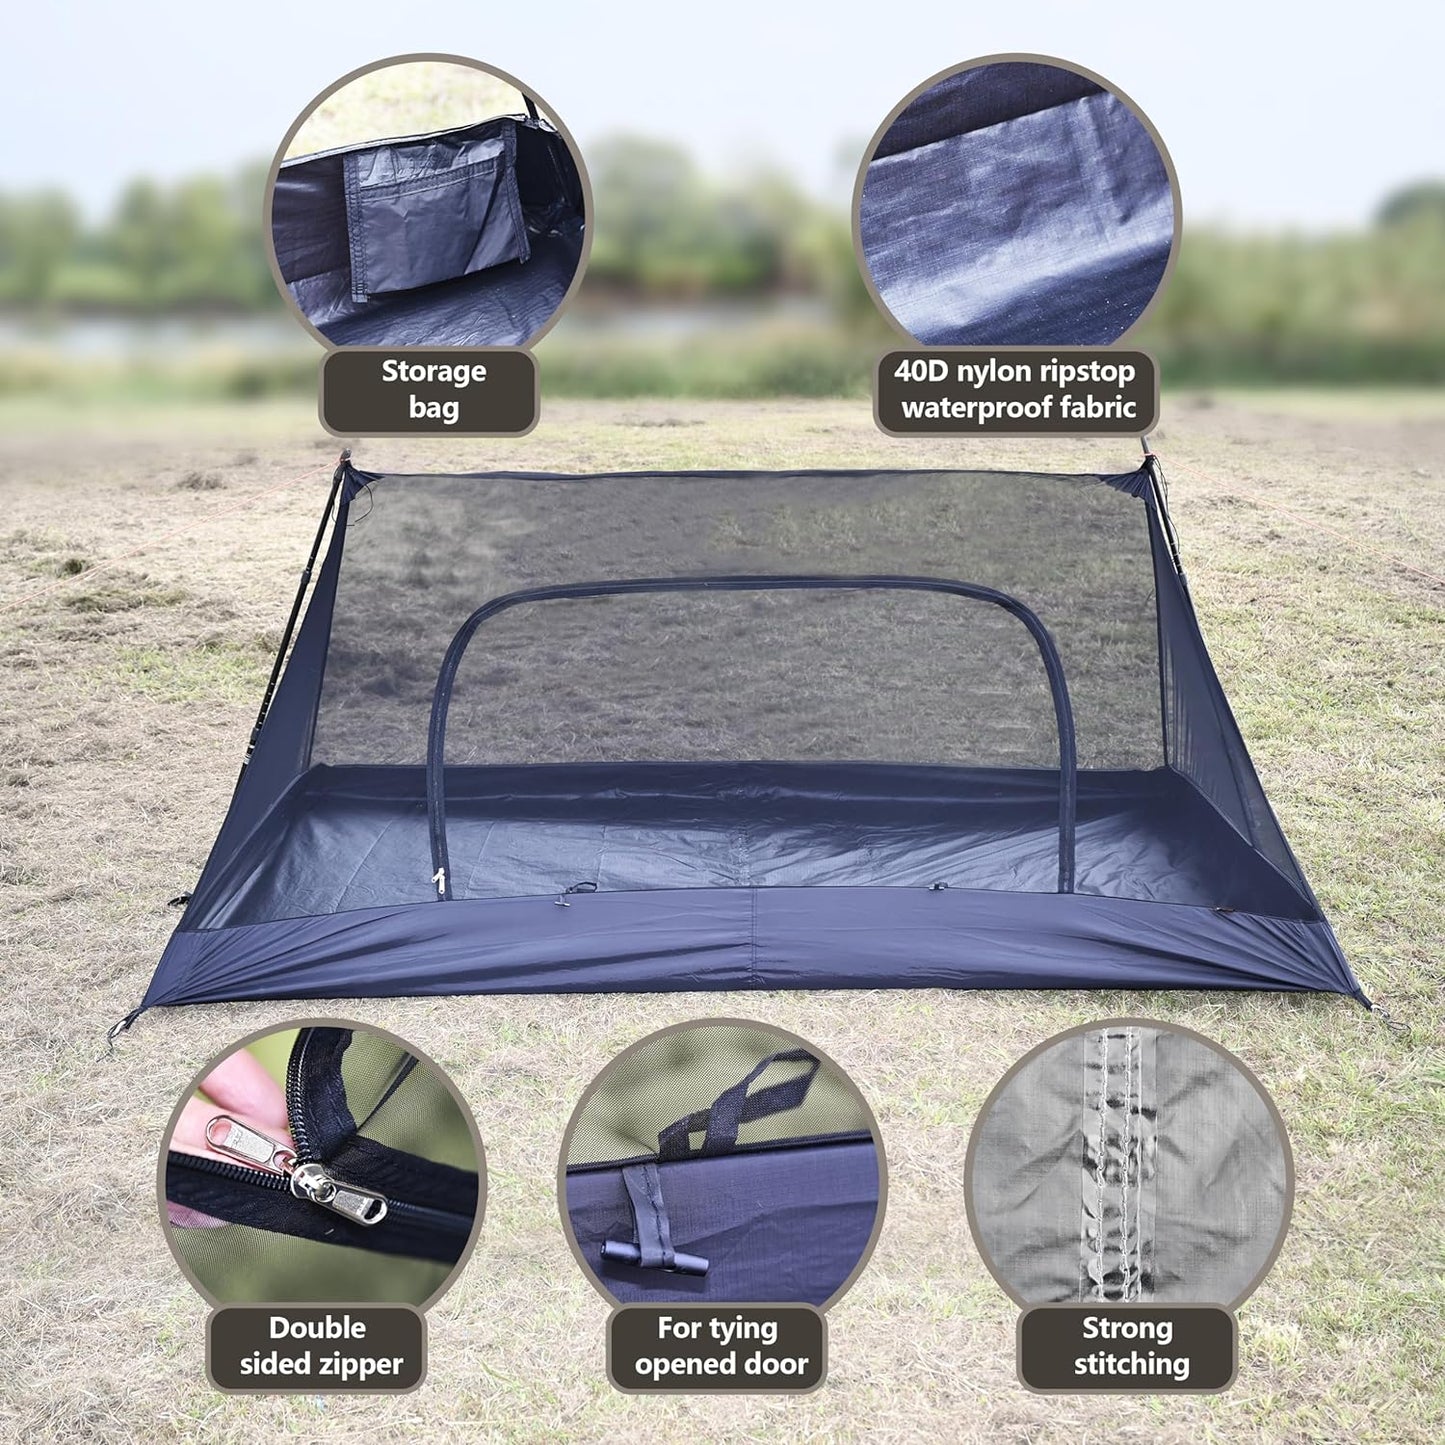 Onewind Premium Camping Shelter Bugnet, Ultralight No-See-Um Breathable Mesh Mosquito Netting with Double Sided Zipper for Camping and Hiking, Black…